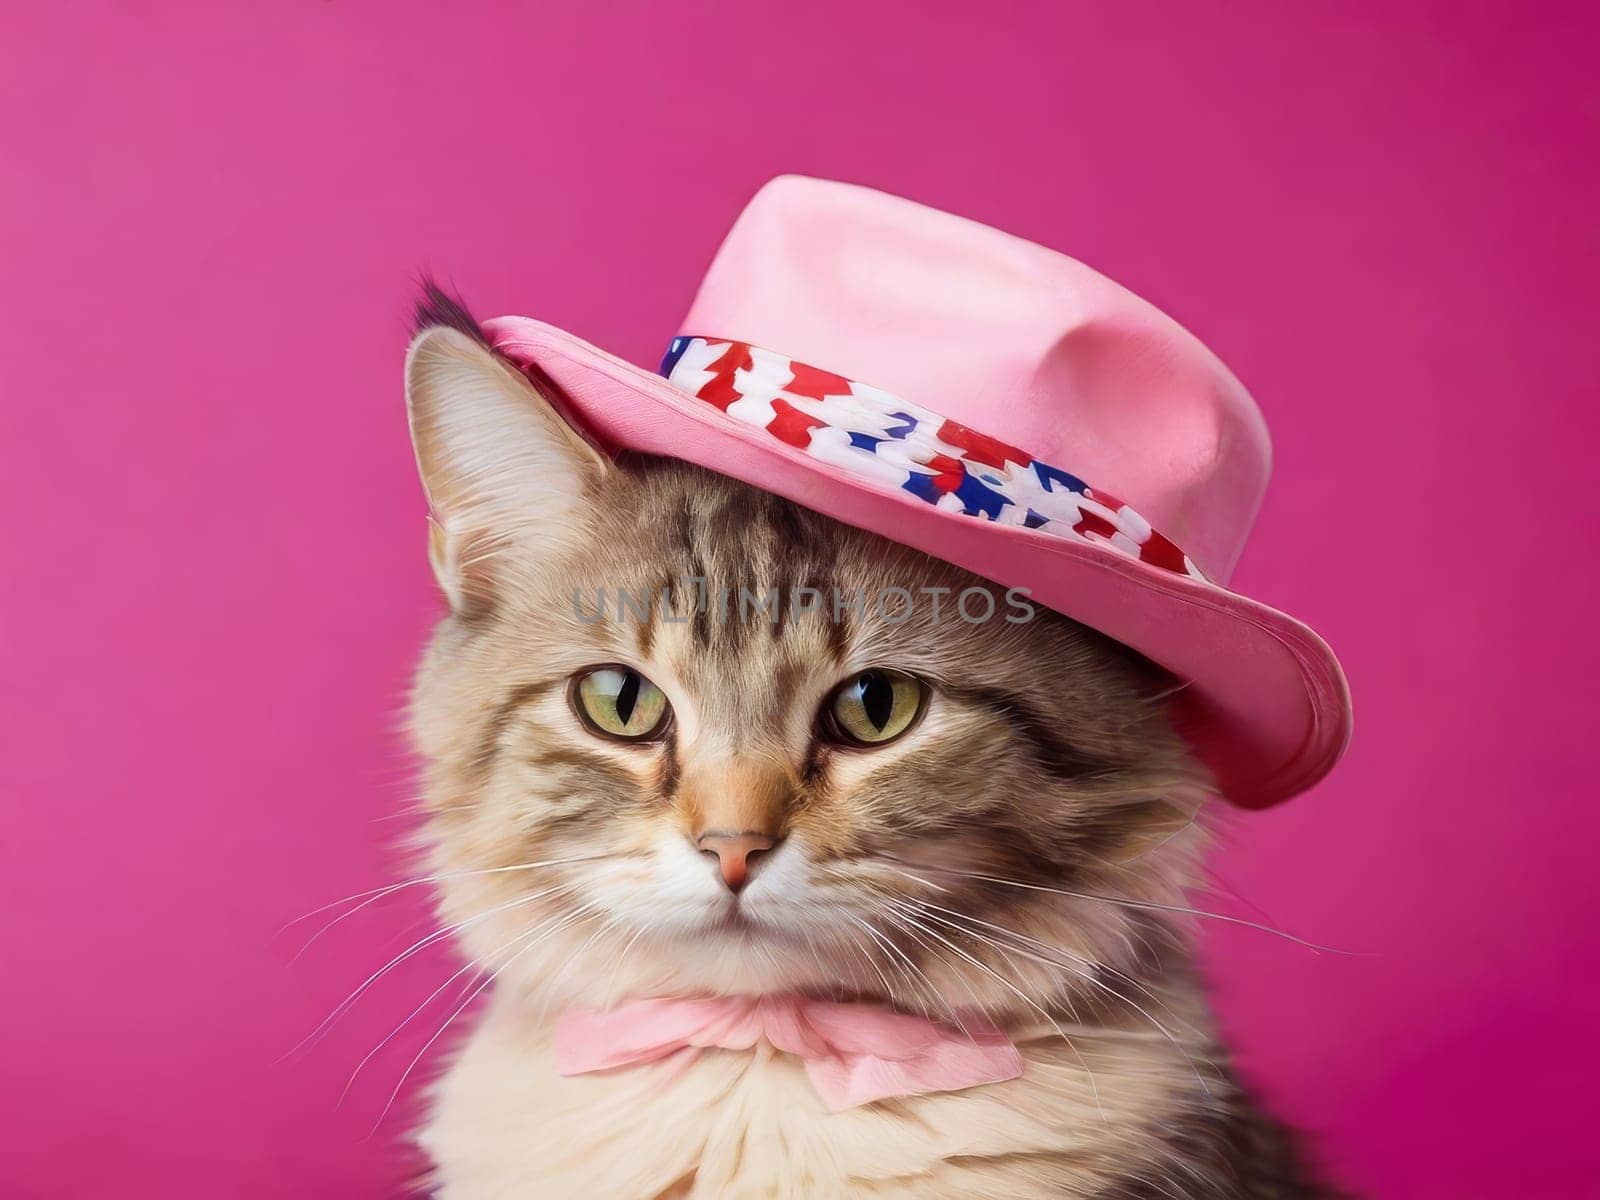 Glamorous cat wearing a hat in the color of the US flag on a pink background. by Ekaterina34